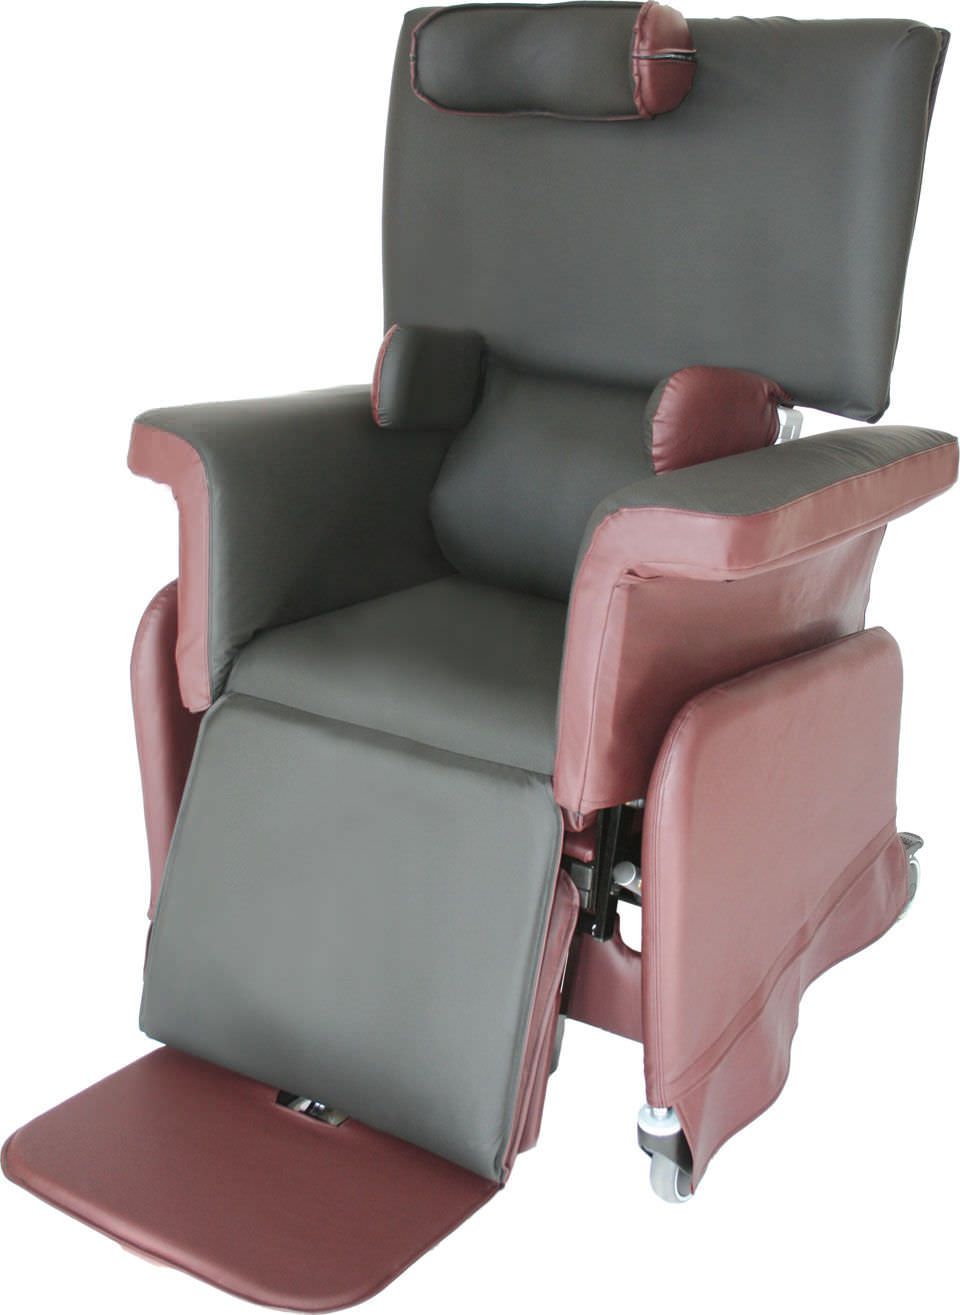 Reclining medical sleeper chair / on casters / electrical Eclipse JCM Seating